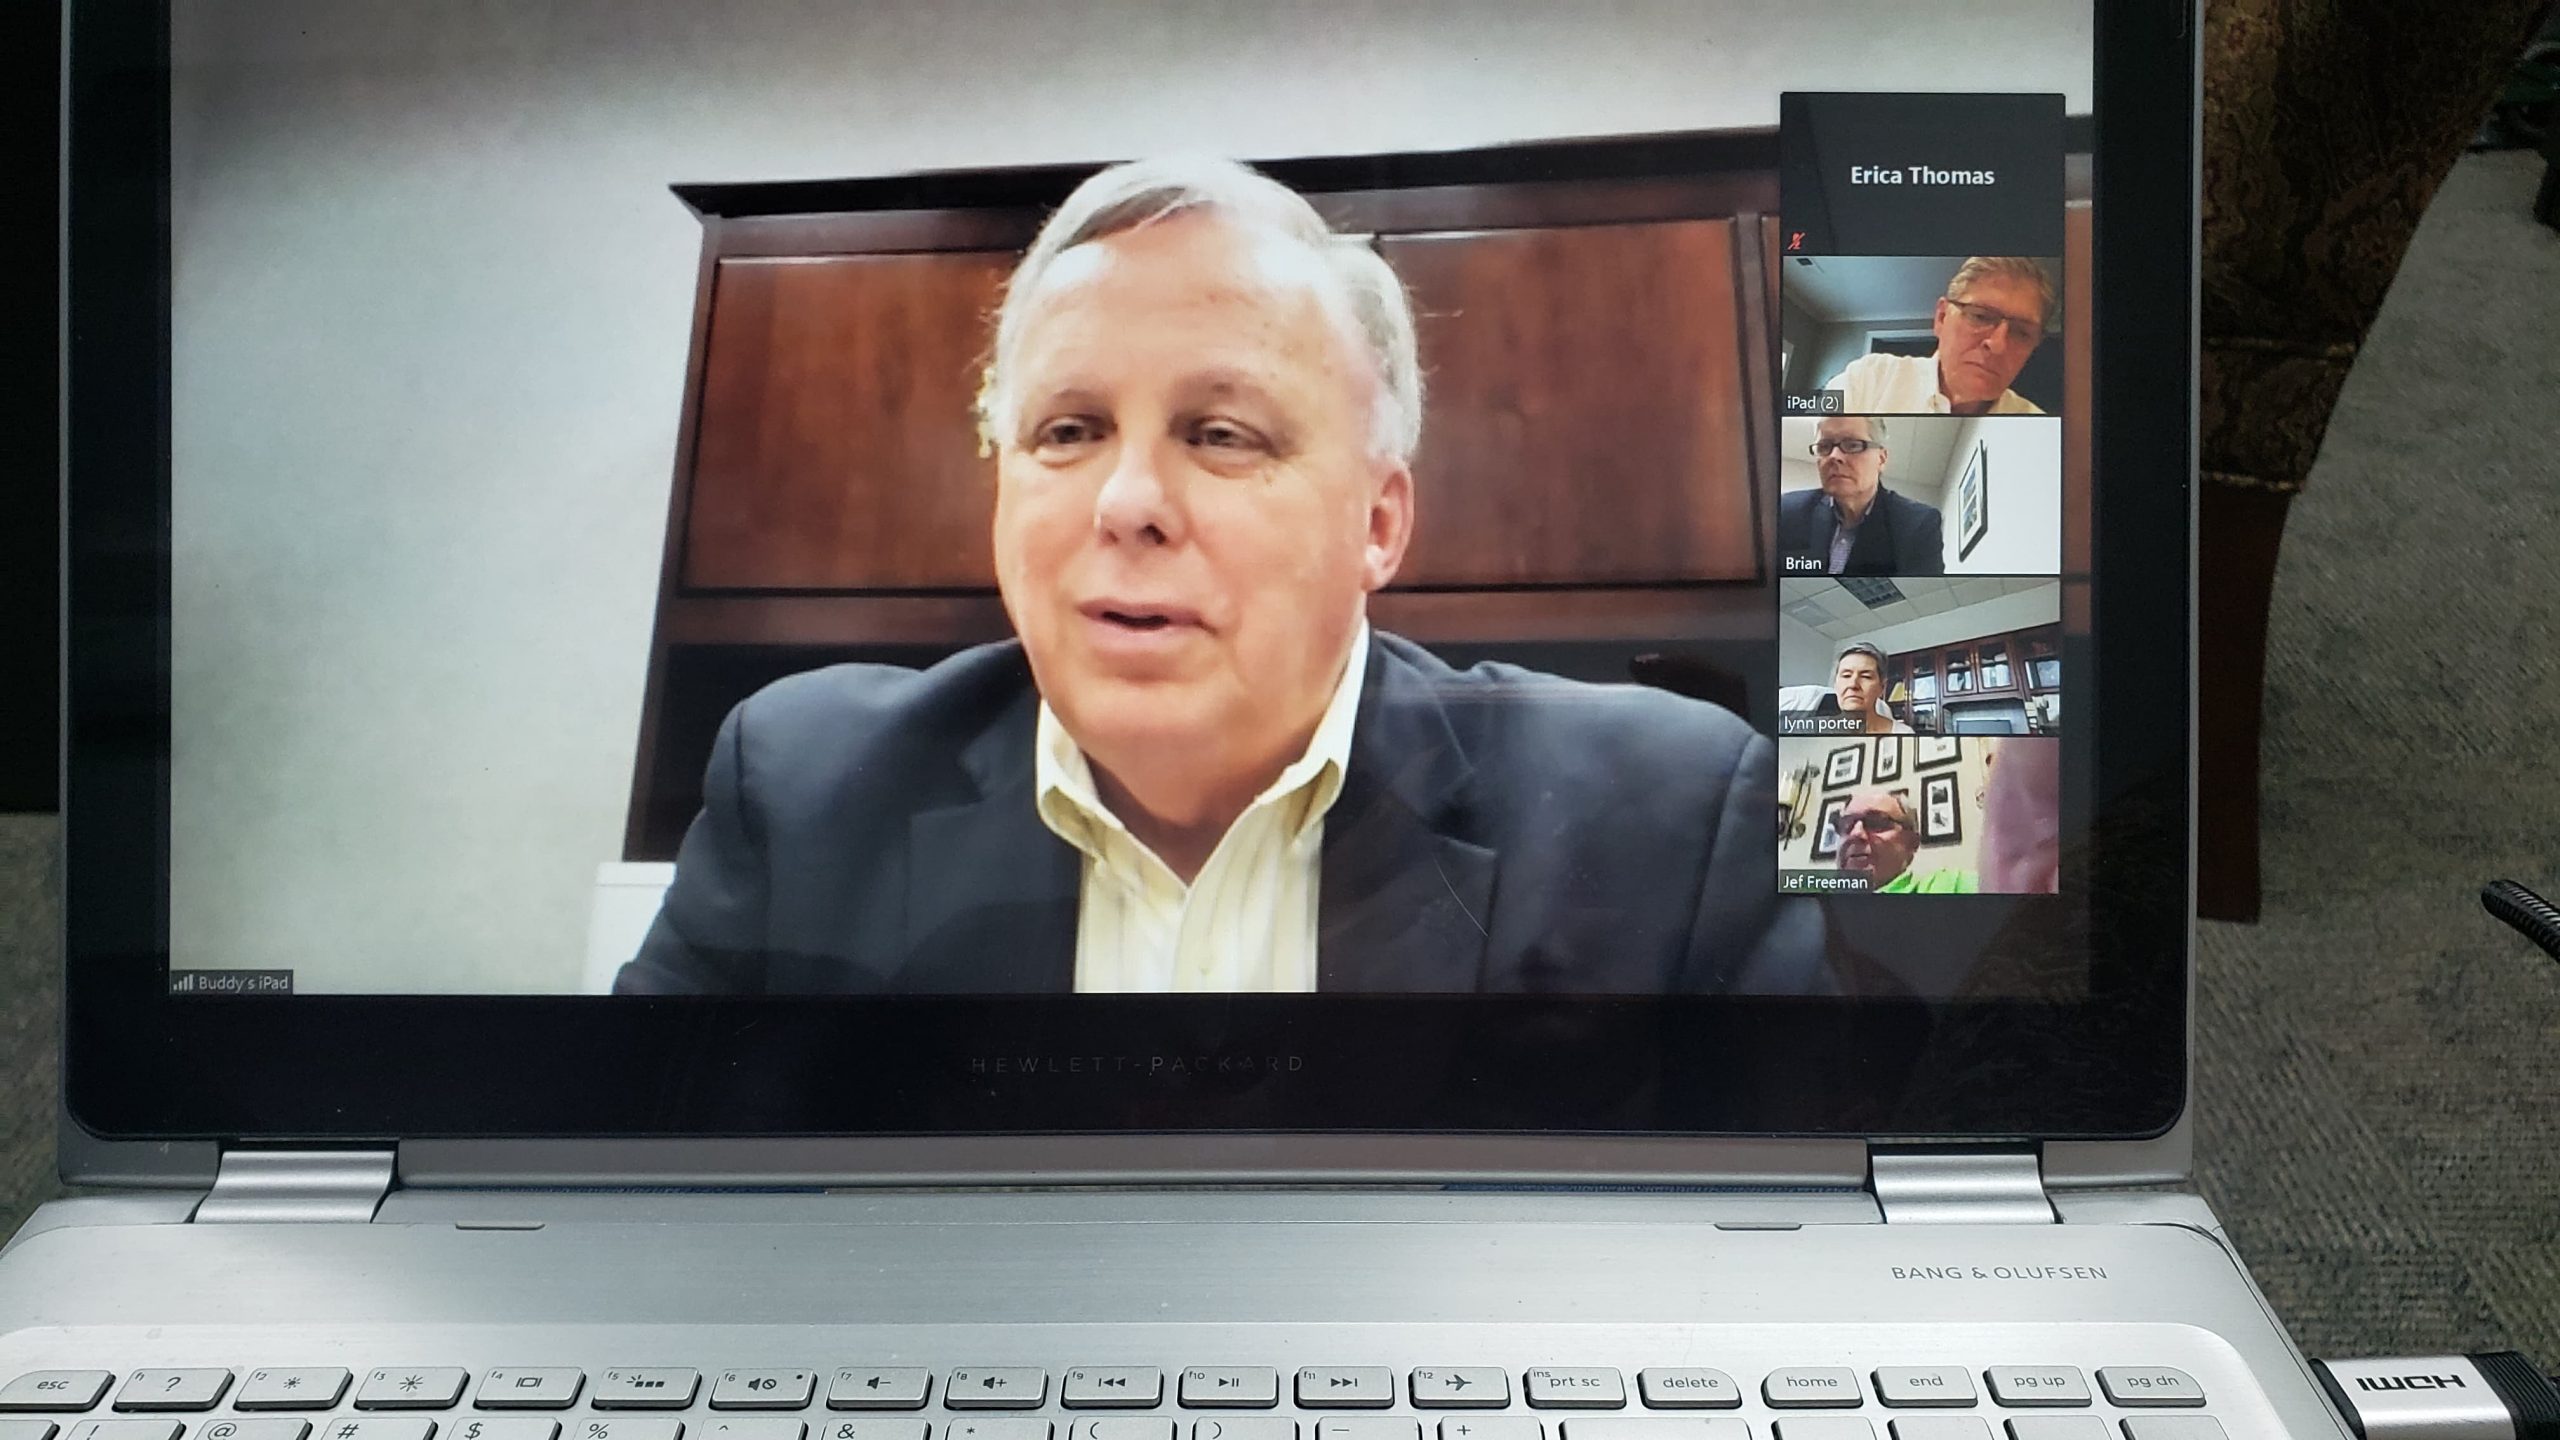 VIDEO: In virtual meeting, Trussville City Council approves purchase of police body cameras, Tasers; City committee meetings suspended